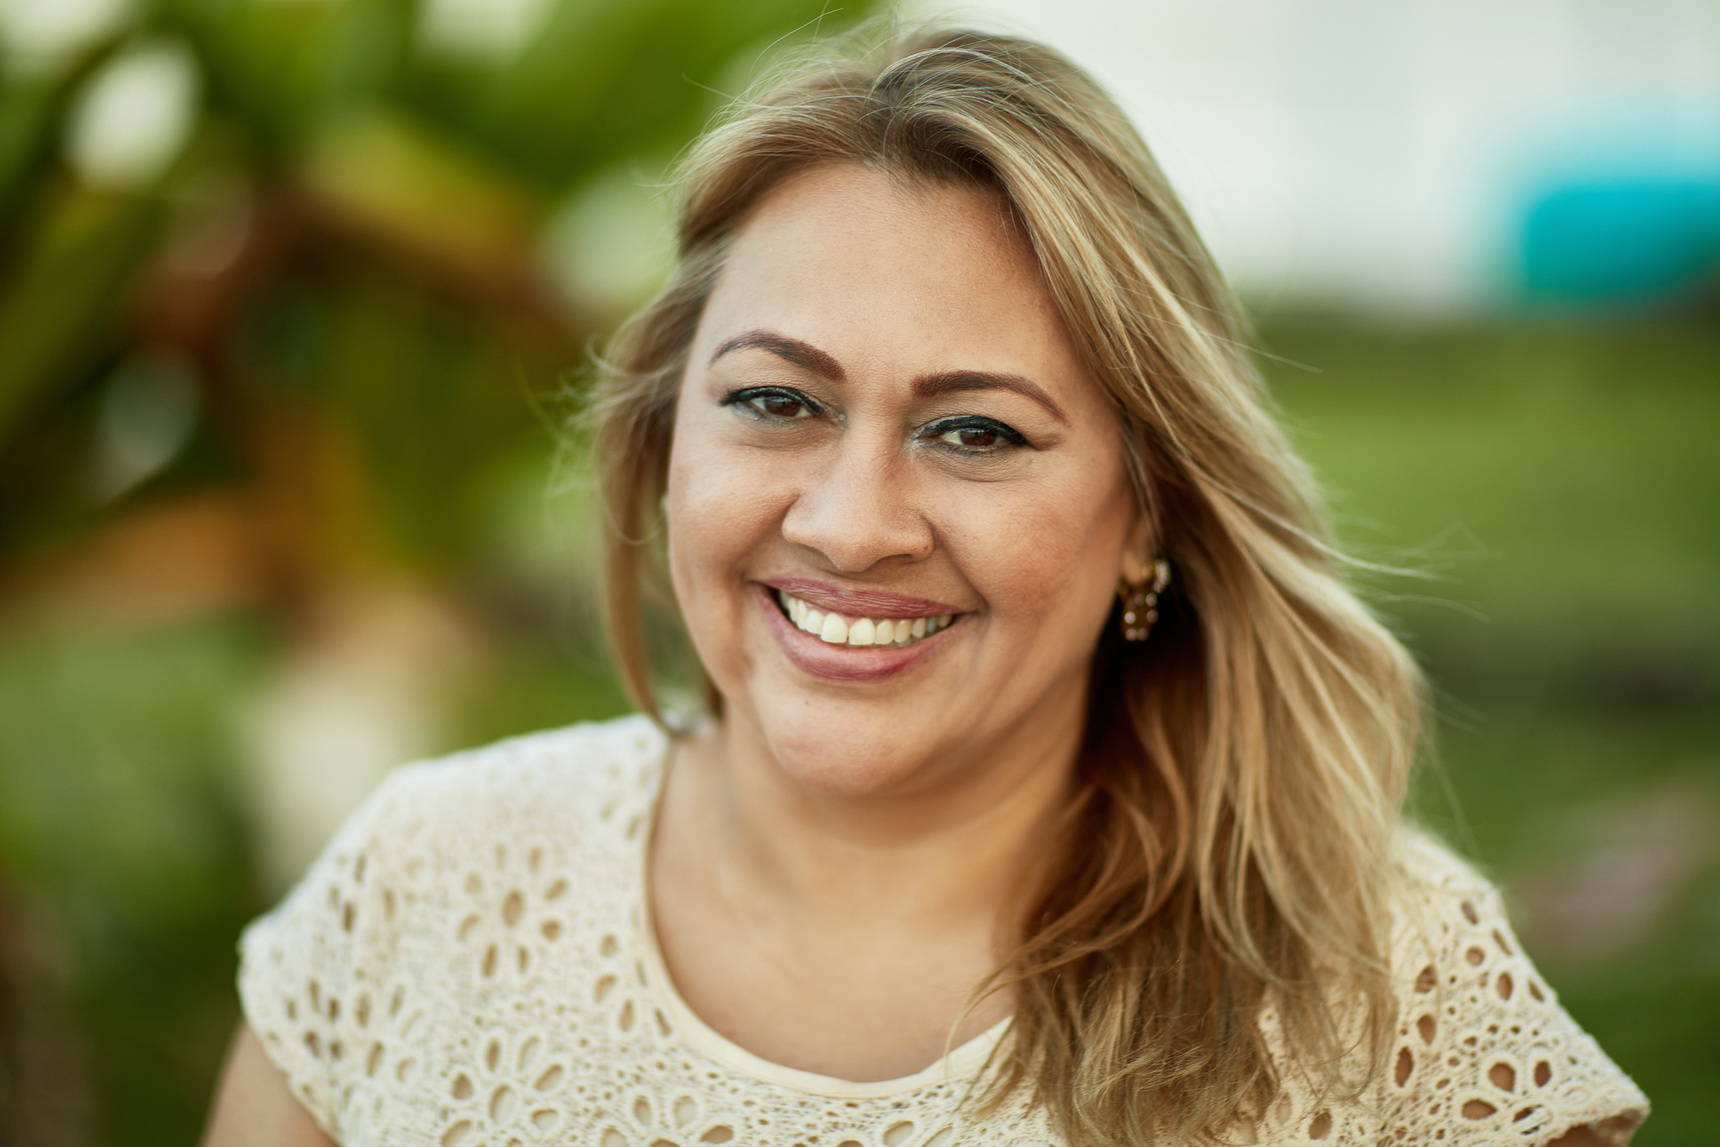 Outdoor Portrait of Relaxed 50 Year Old Hispanic Woman